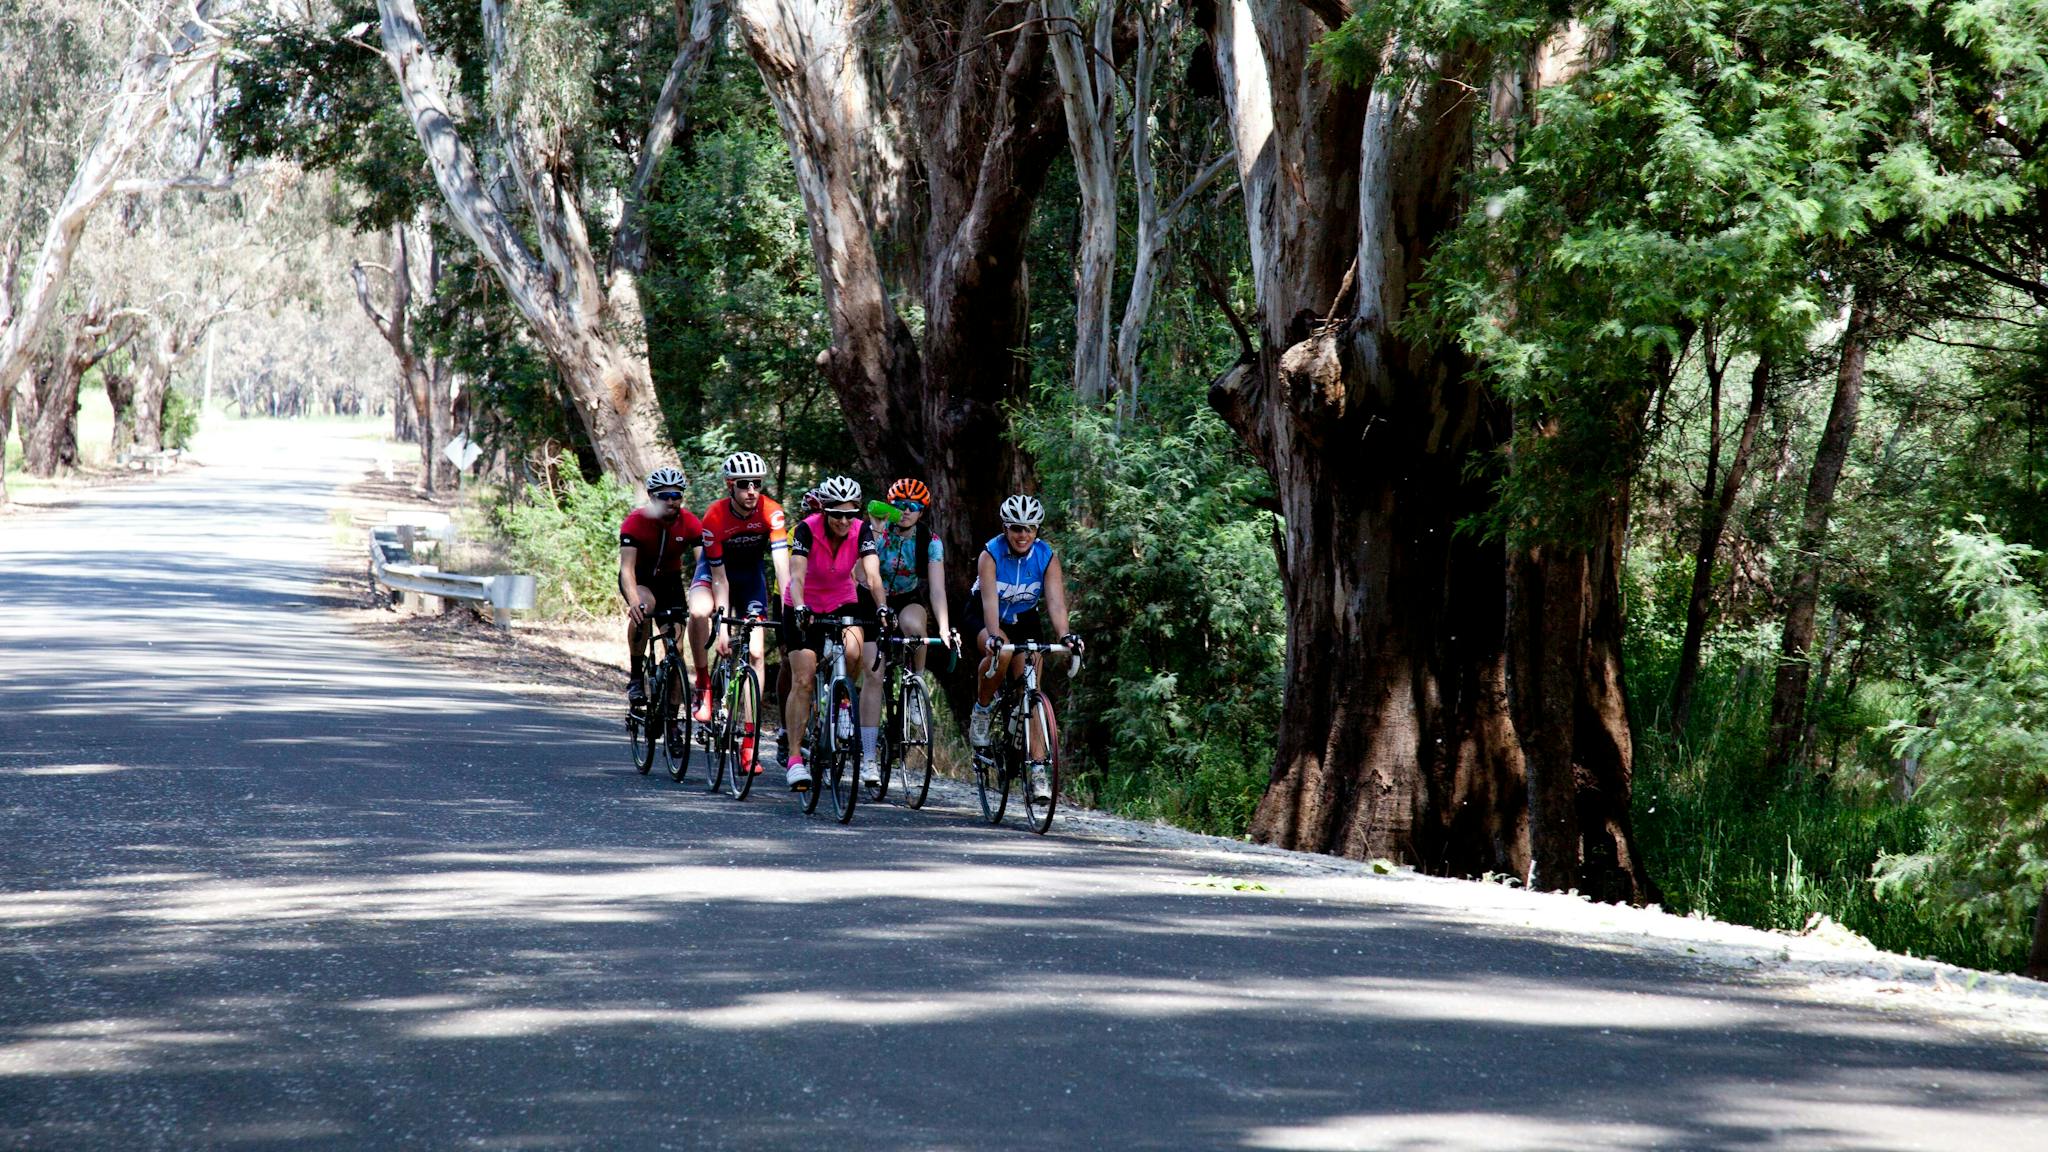 Cyclists riding on road, sunny day, trees on side of road